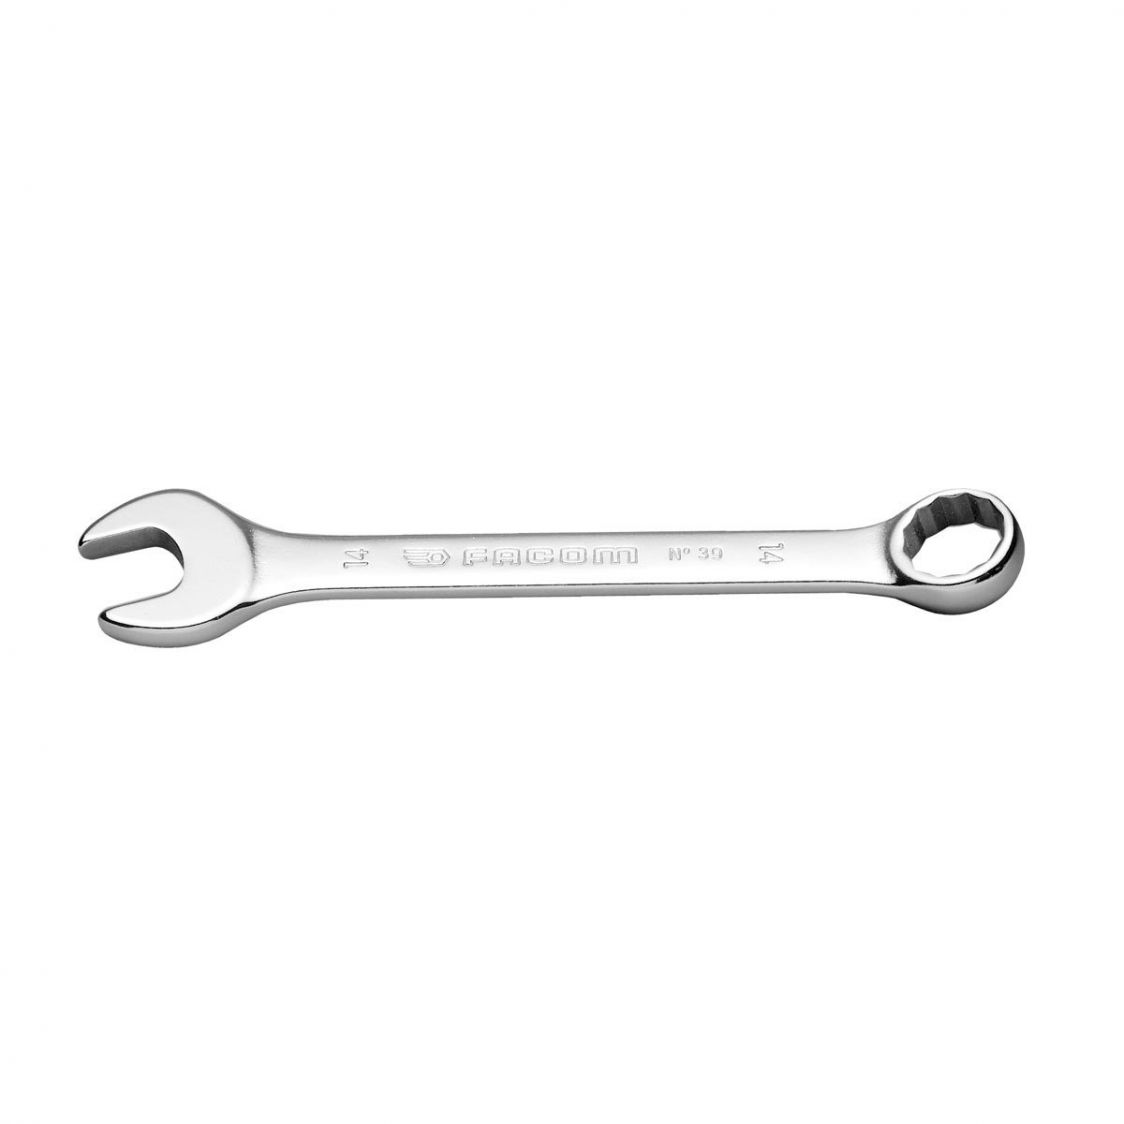 FACOM 39.15 - 15mm Metric Stubby Combination Spanner